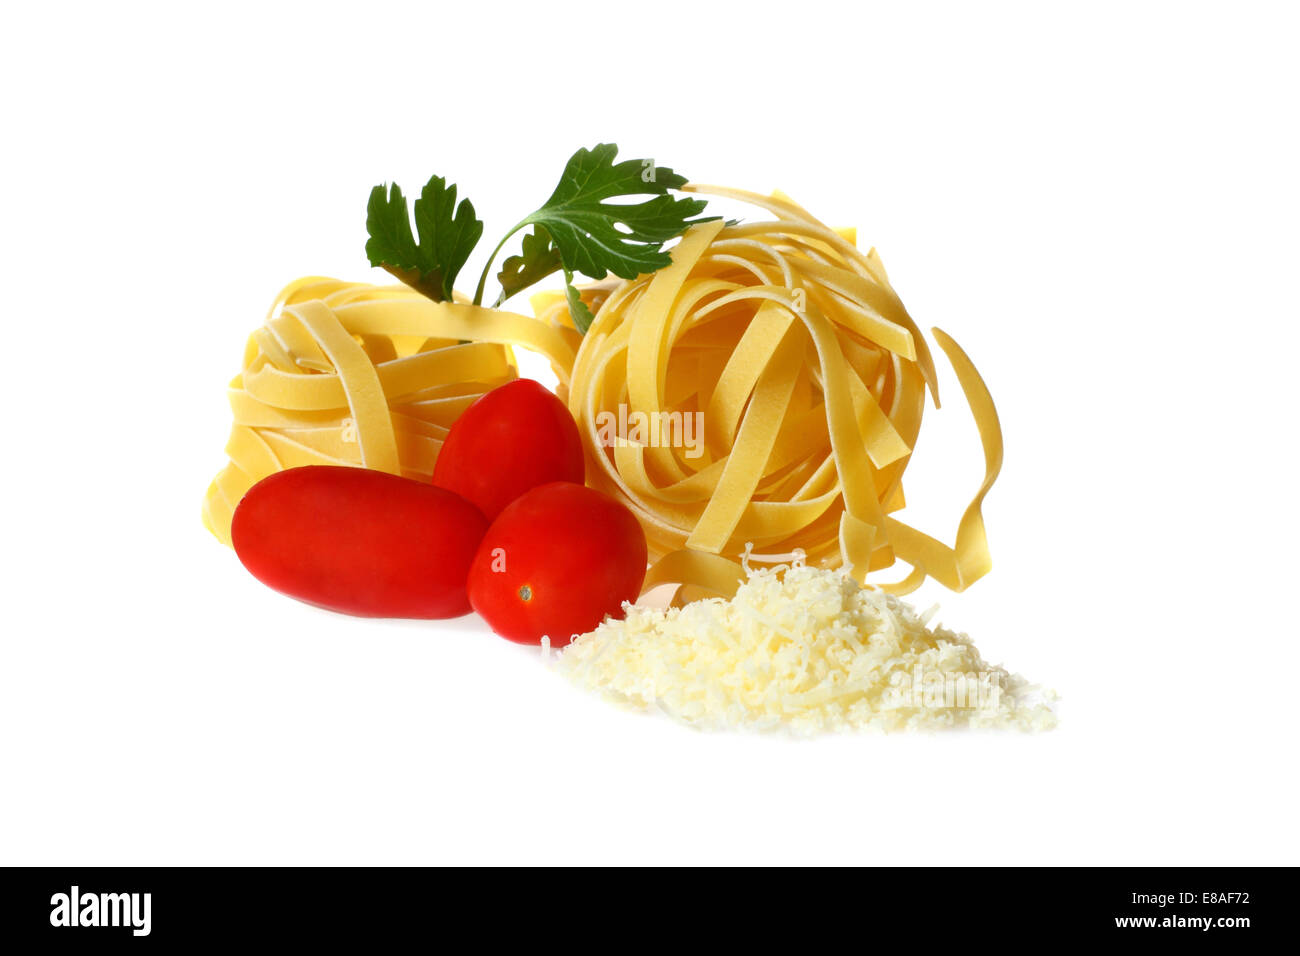 Pasta, tomatoes and grated cheese isolated on white background with shadow Stock Photo